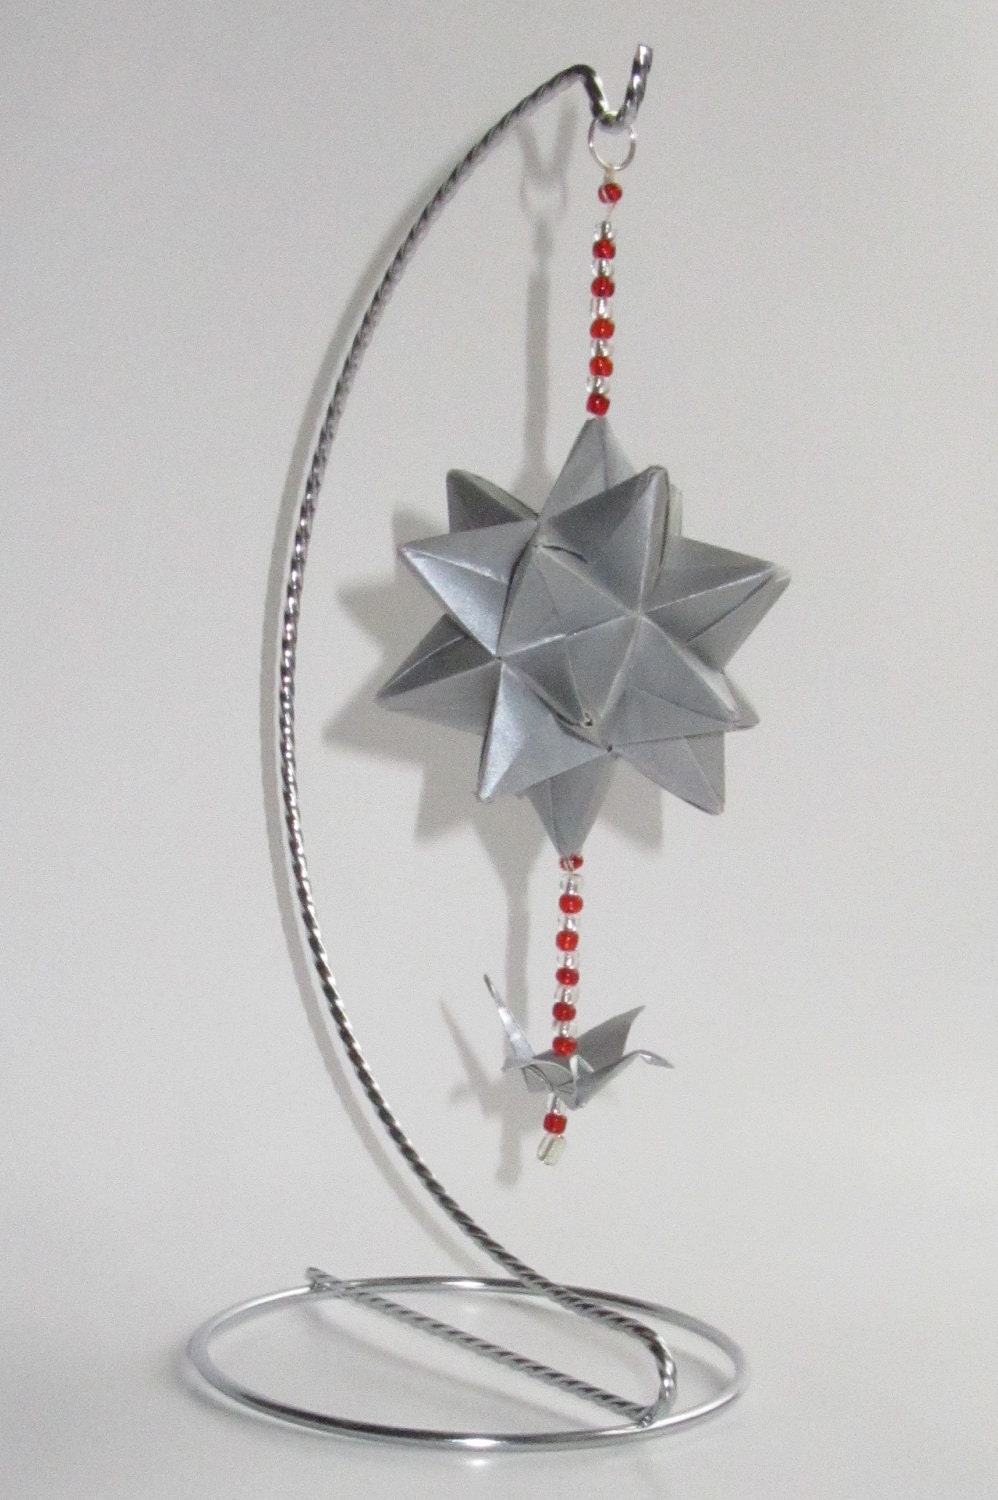 CHRISTMAS Gift Home Décor 3D Modular Origami Star Geometric Decoration,Spiked Icosahedron HANDMADE in Silver Vellum Paper OoAK